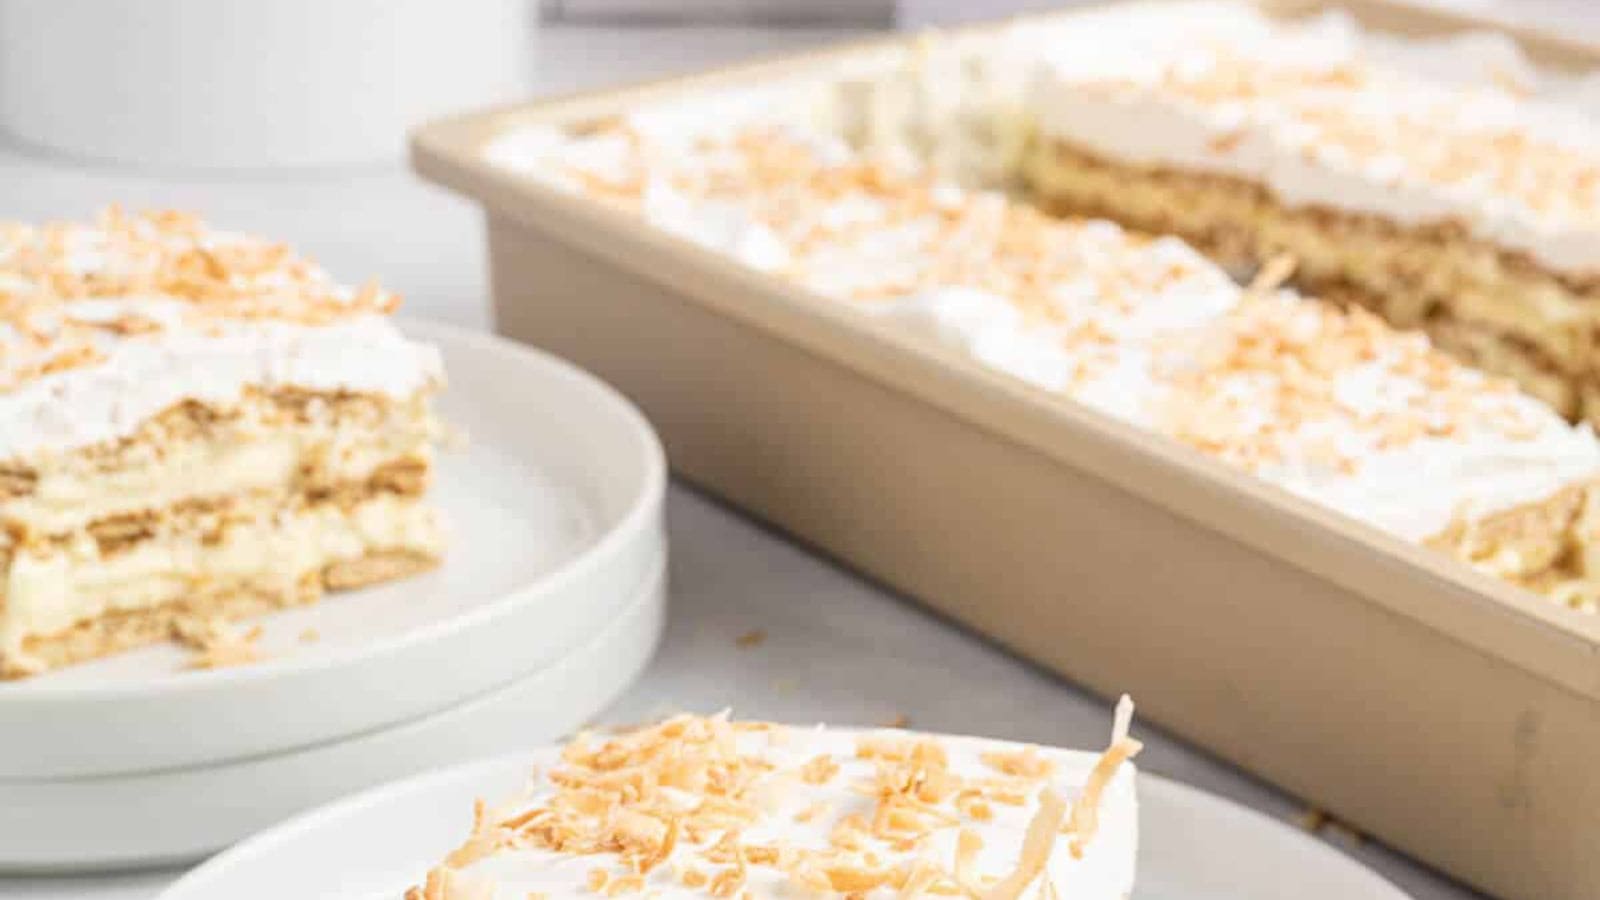 Coconut icebox cake with layers of whipped topping and graham crackers.